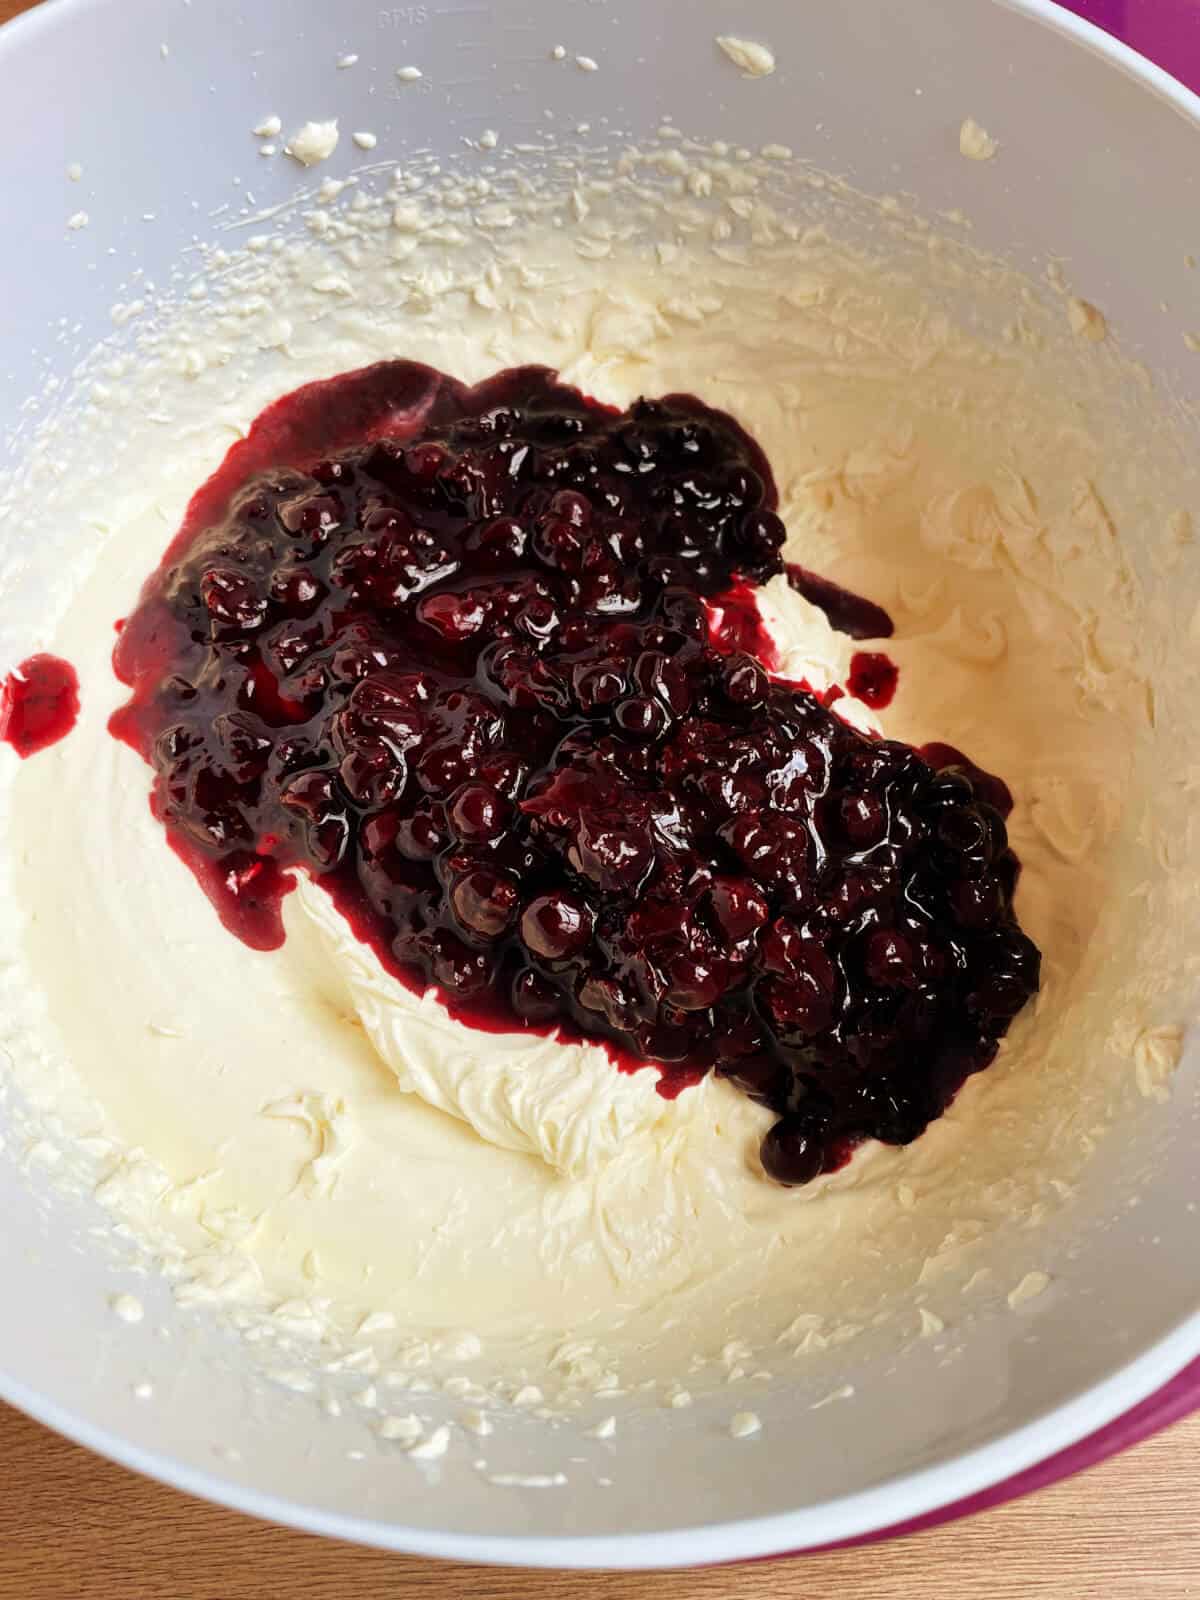 Blackcurrant puree added into whipped double cream.